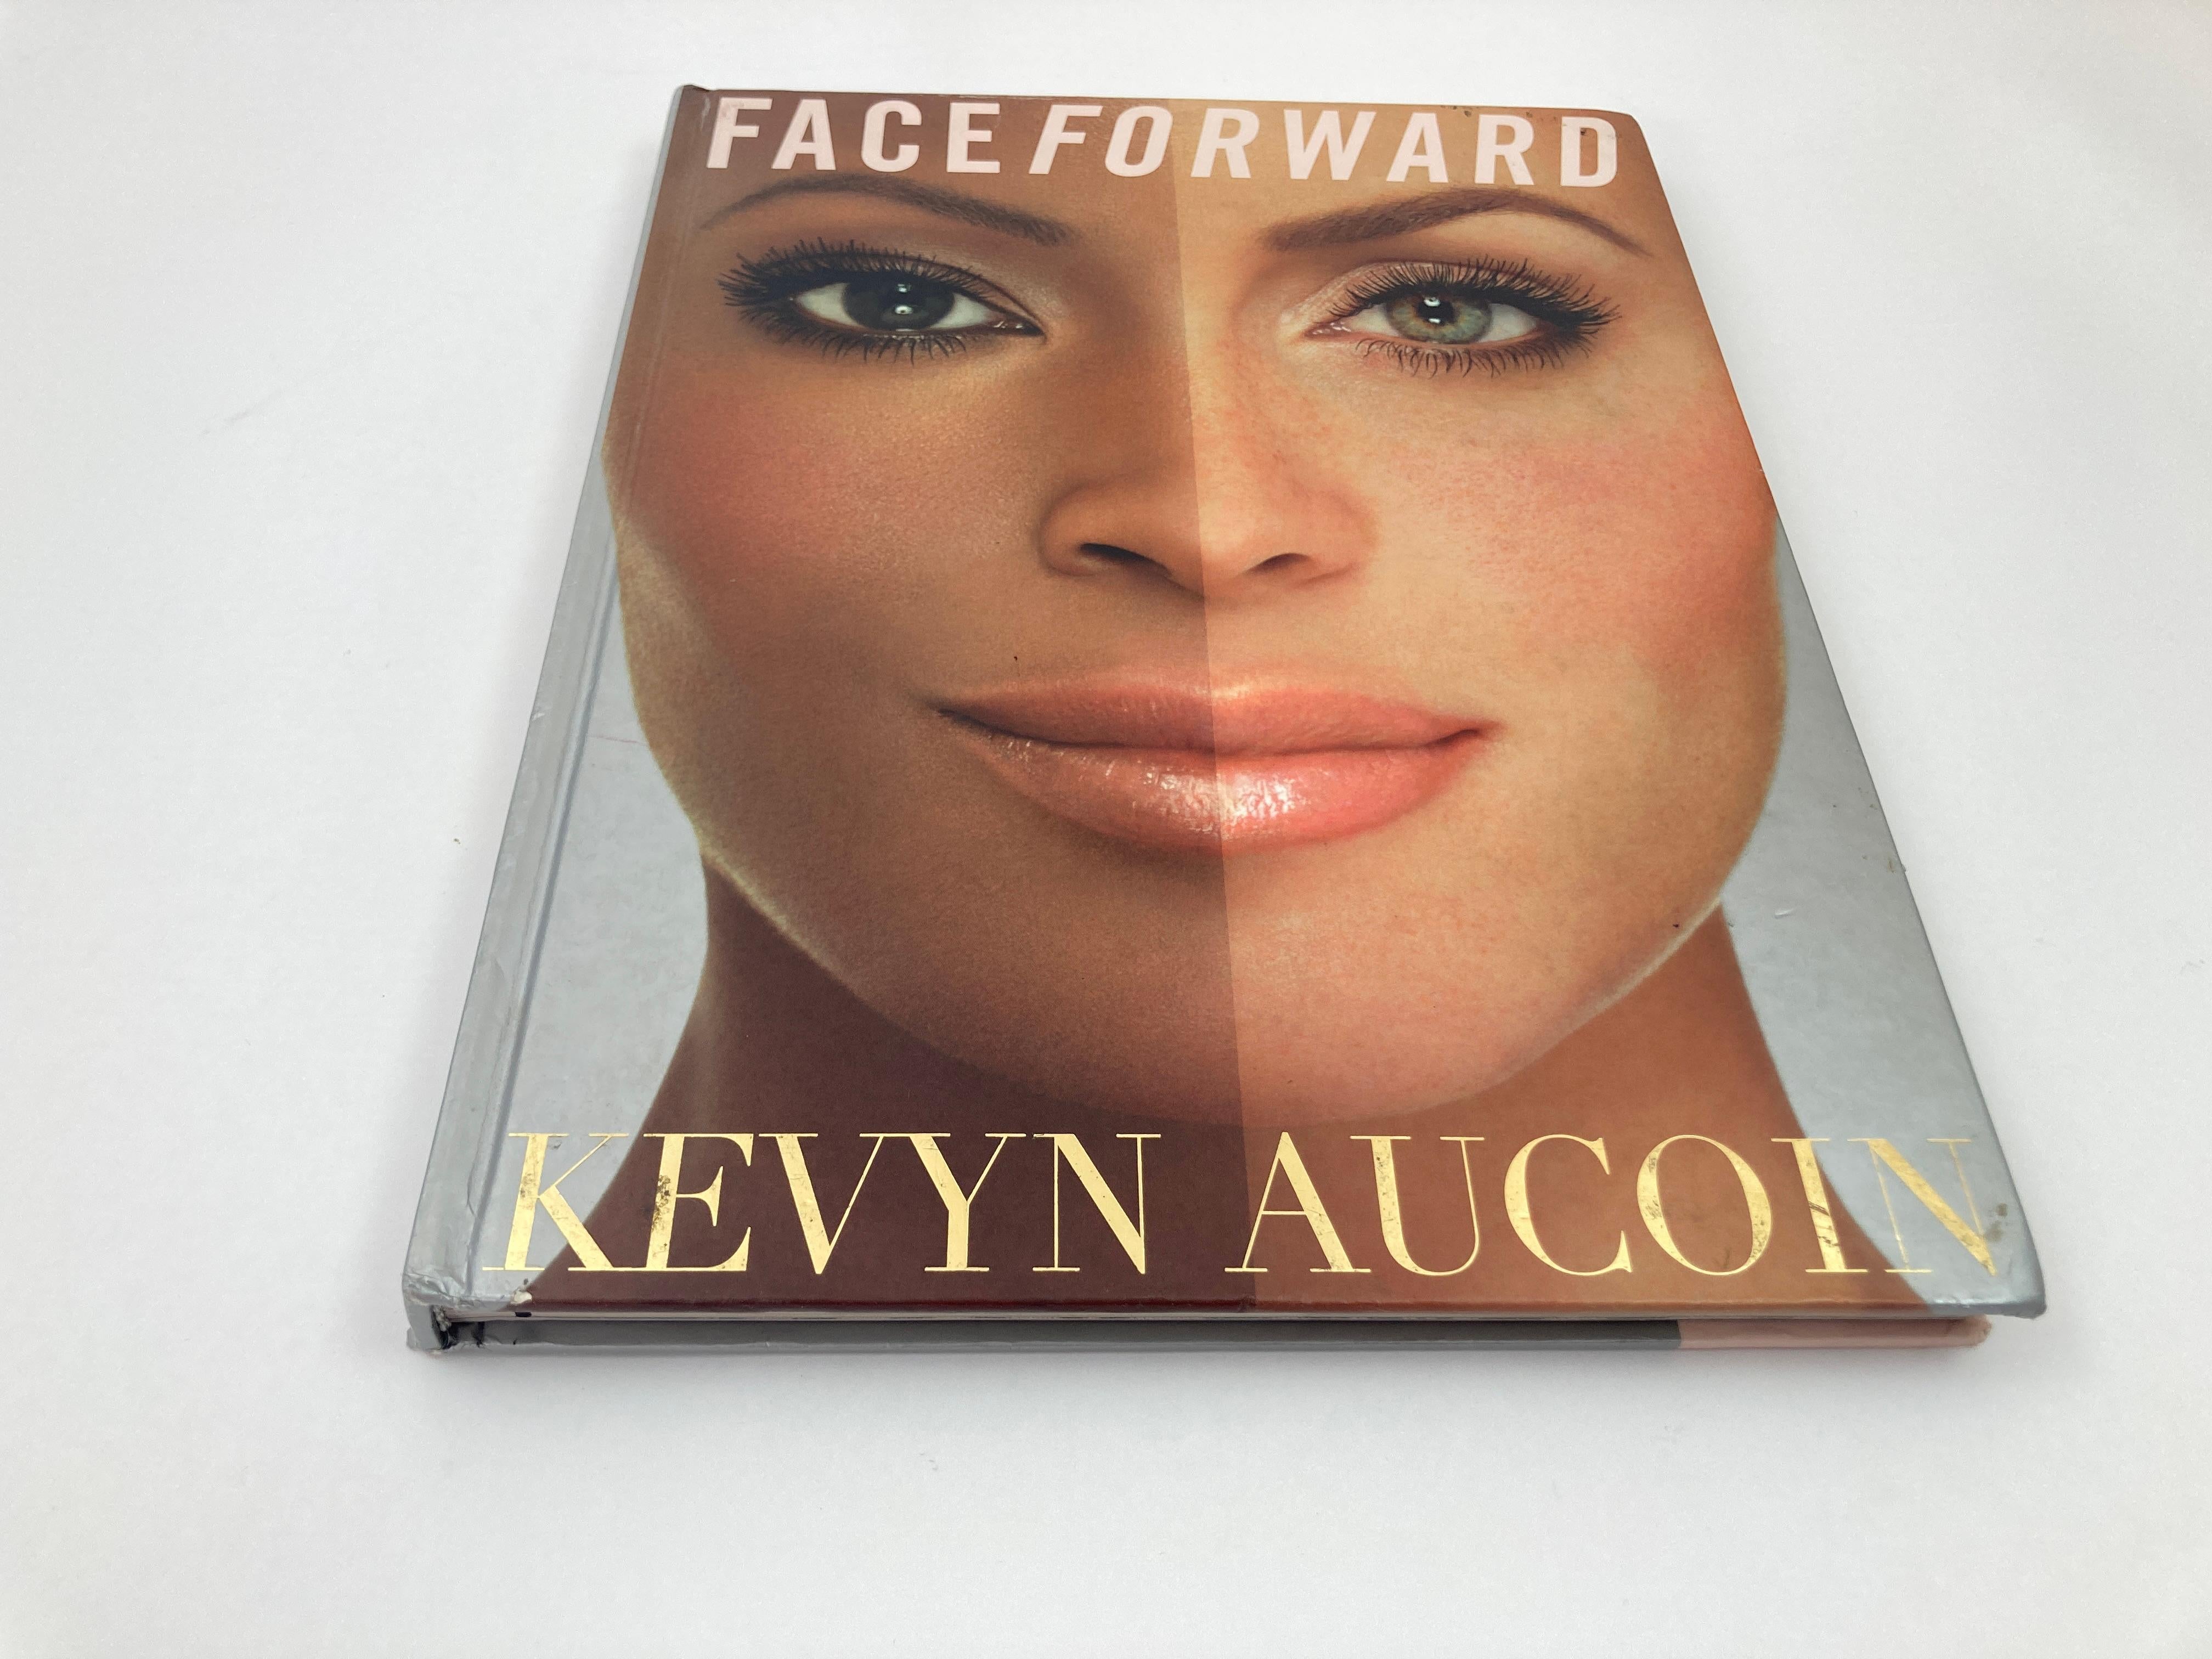 Face Forward  By Kevyn Aucoin Hardcover Book.
Face Forward is a cosmetics book written by Kevyn Aucoin. It was a New York Times bestseller. The book was widely noted for introducing makeup sculpting and contouring to the general public for the first